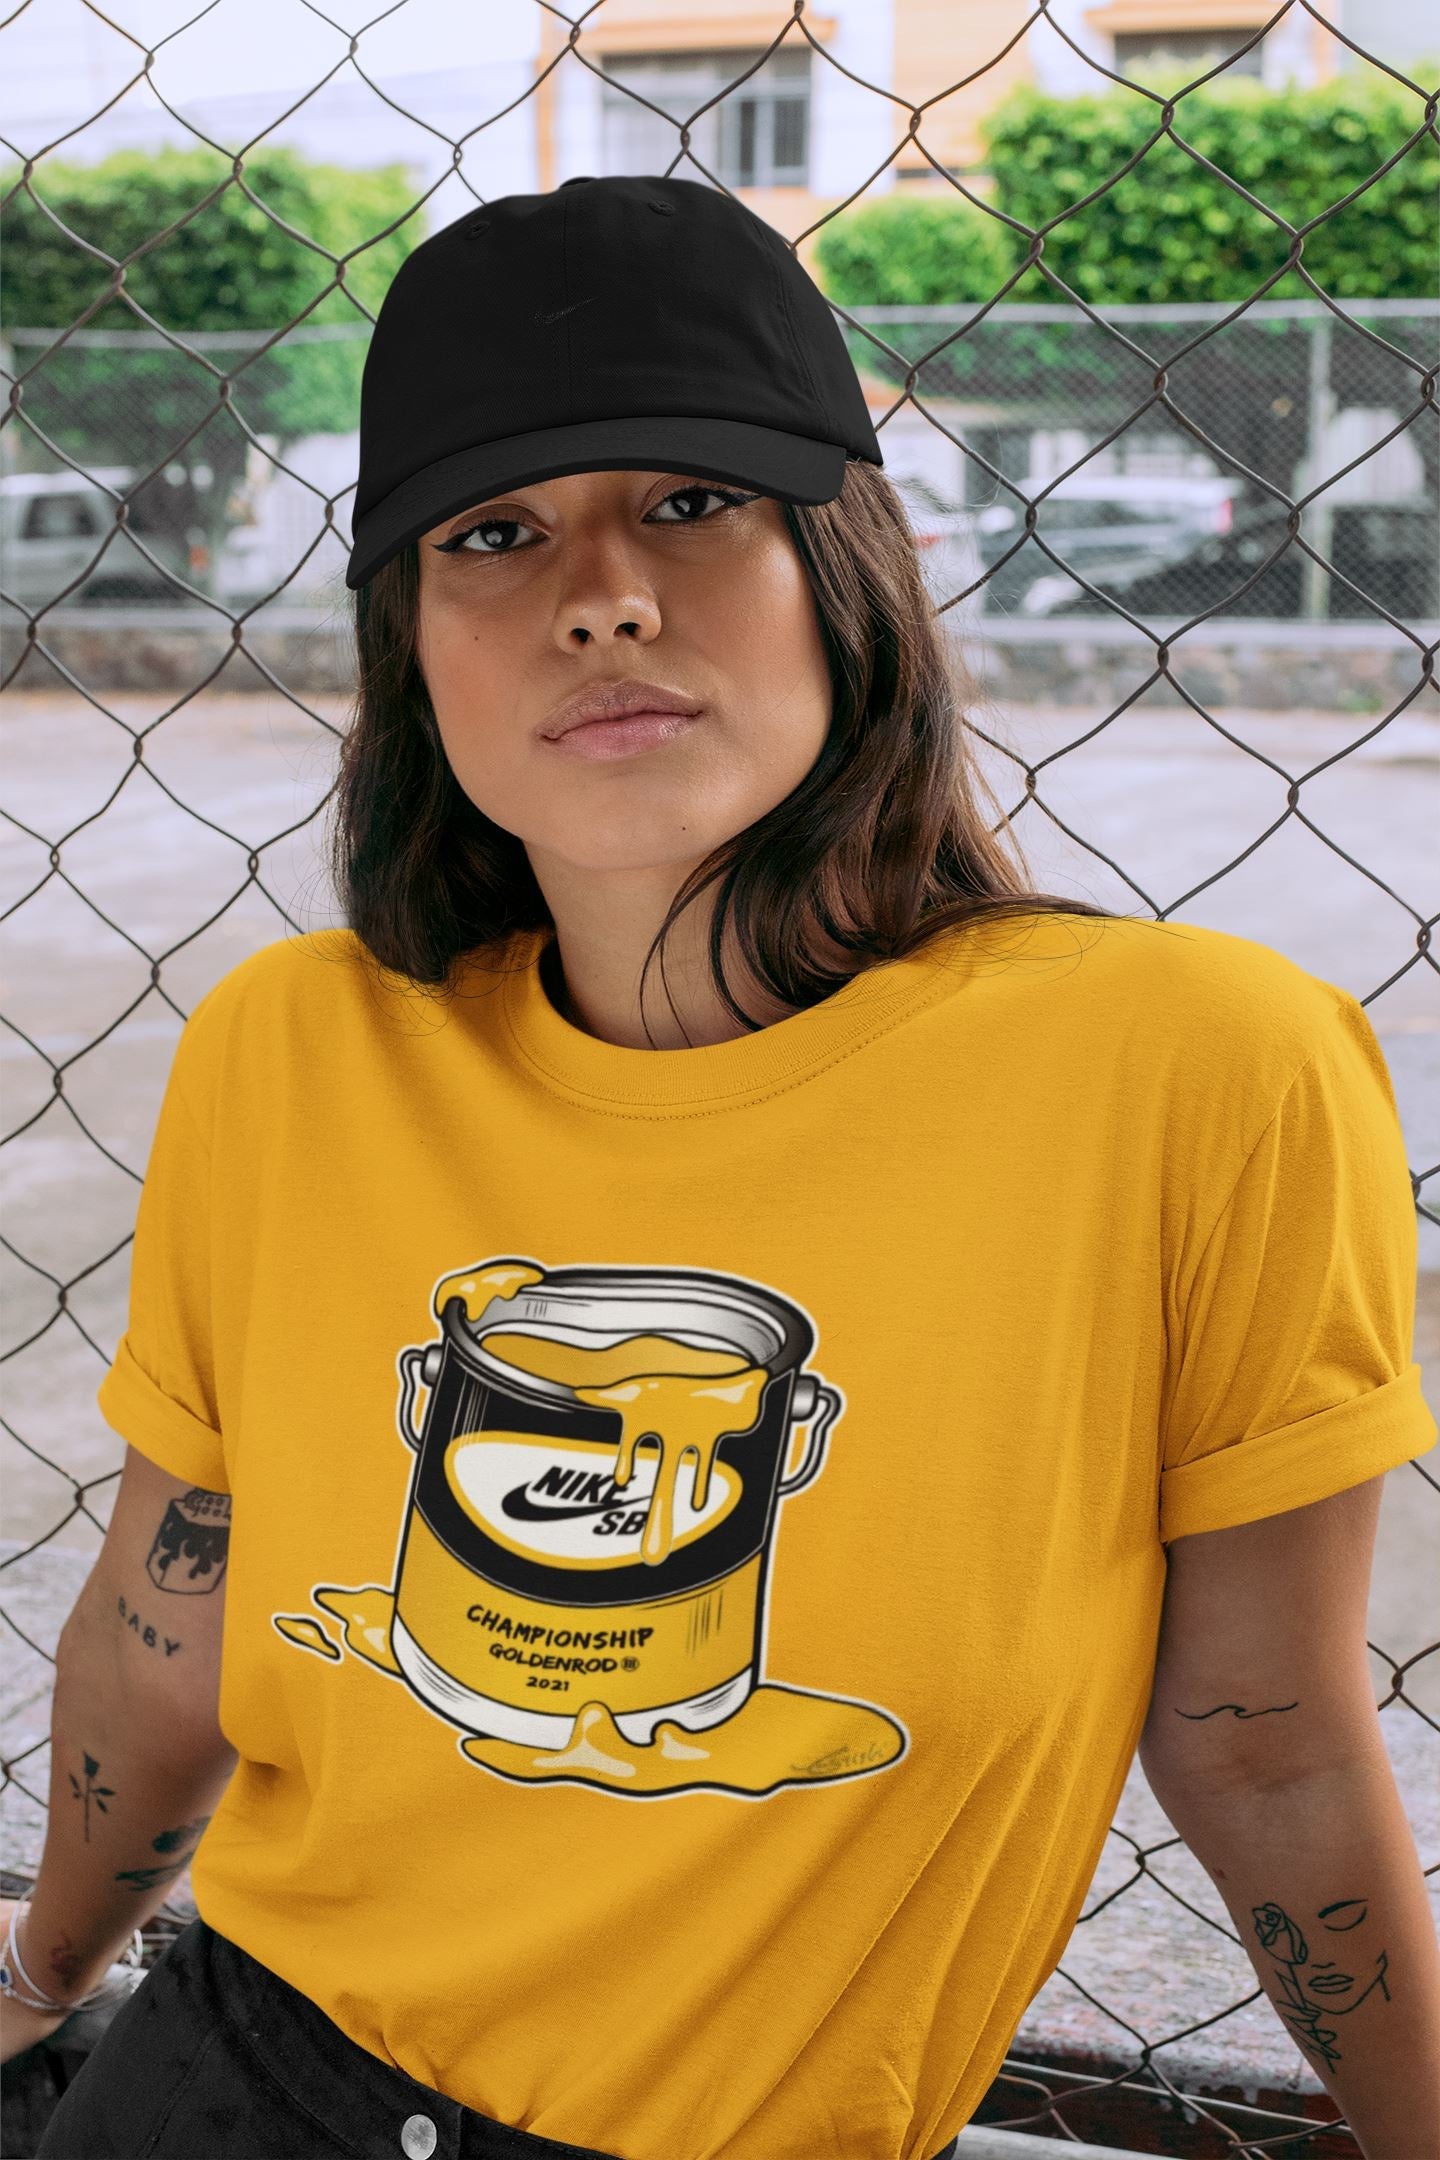 Dunk Championship Goldenrod Sneaker Match Tees Bucket Sneaker Tees Dunk Championship Goldenrod Sneaker Release Tees Unisex Shirts